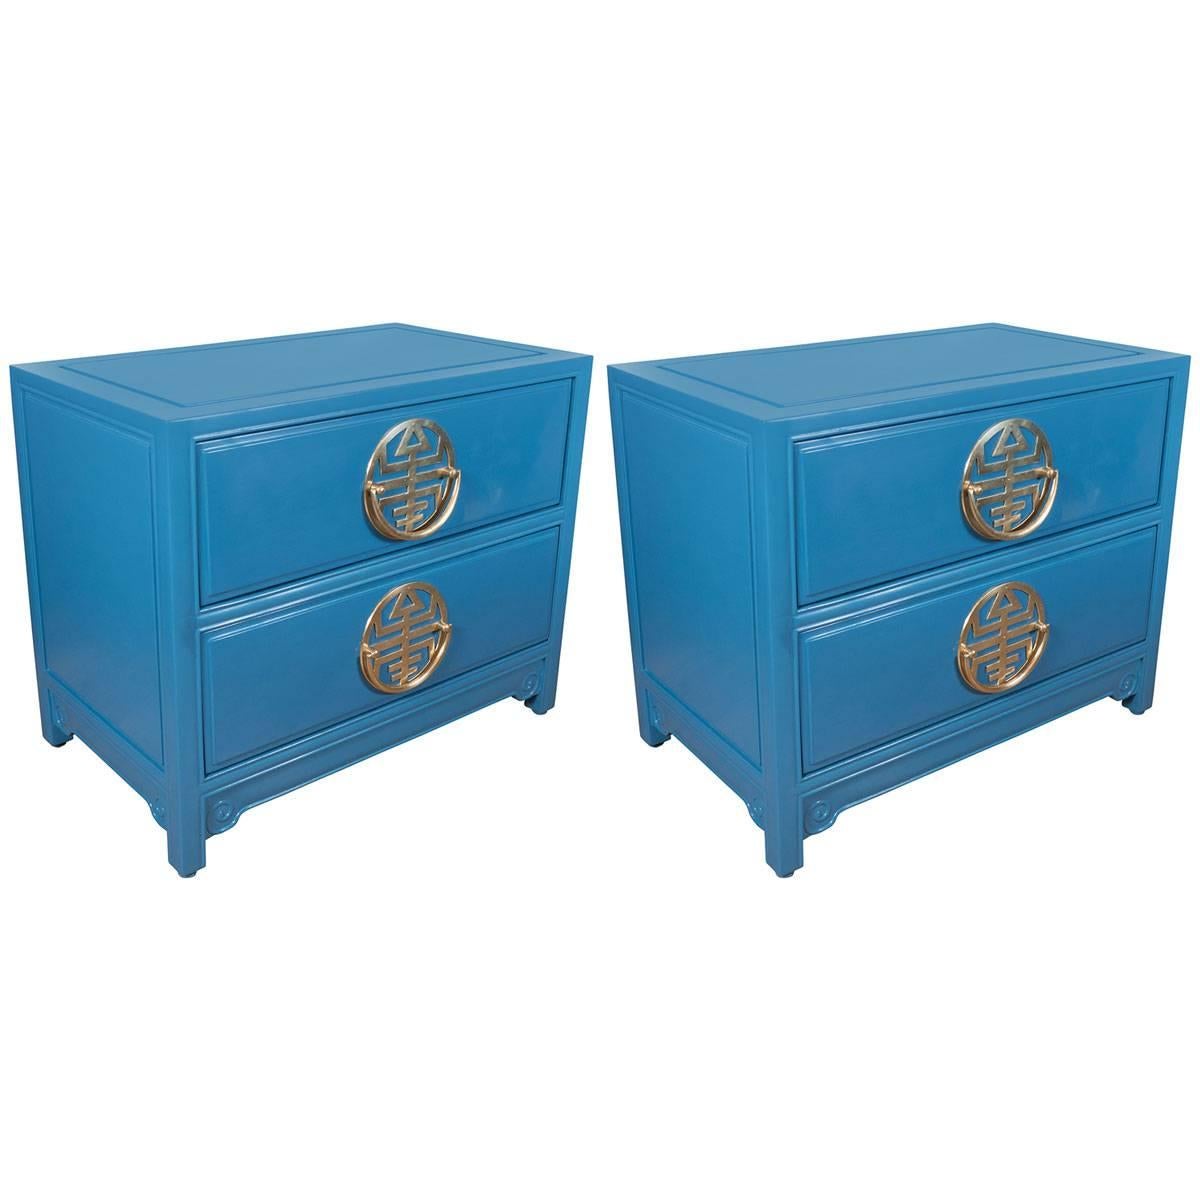 Pair of  Vintage Blue Lacquered Bedside Tables For Sale